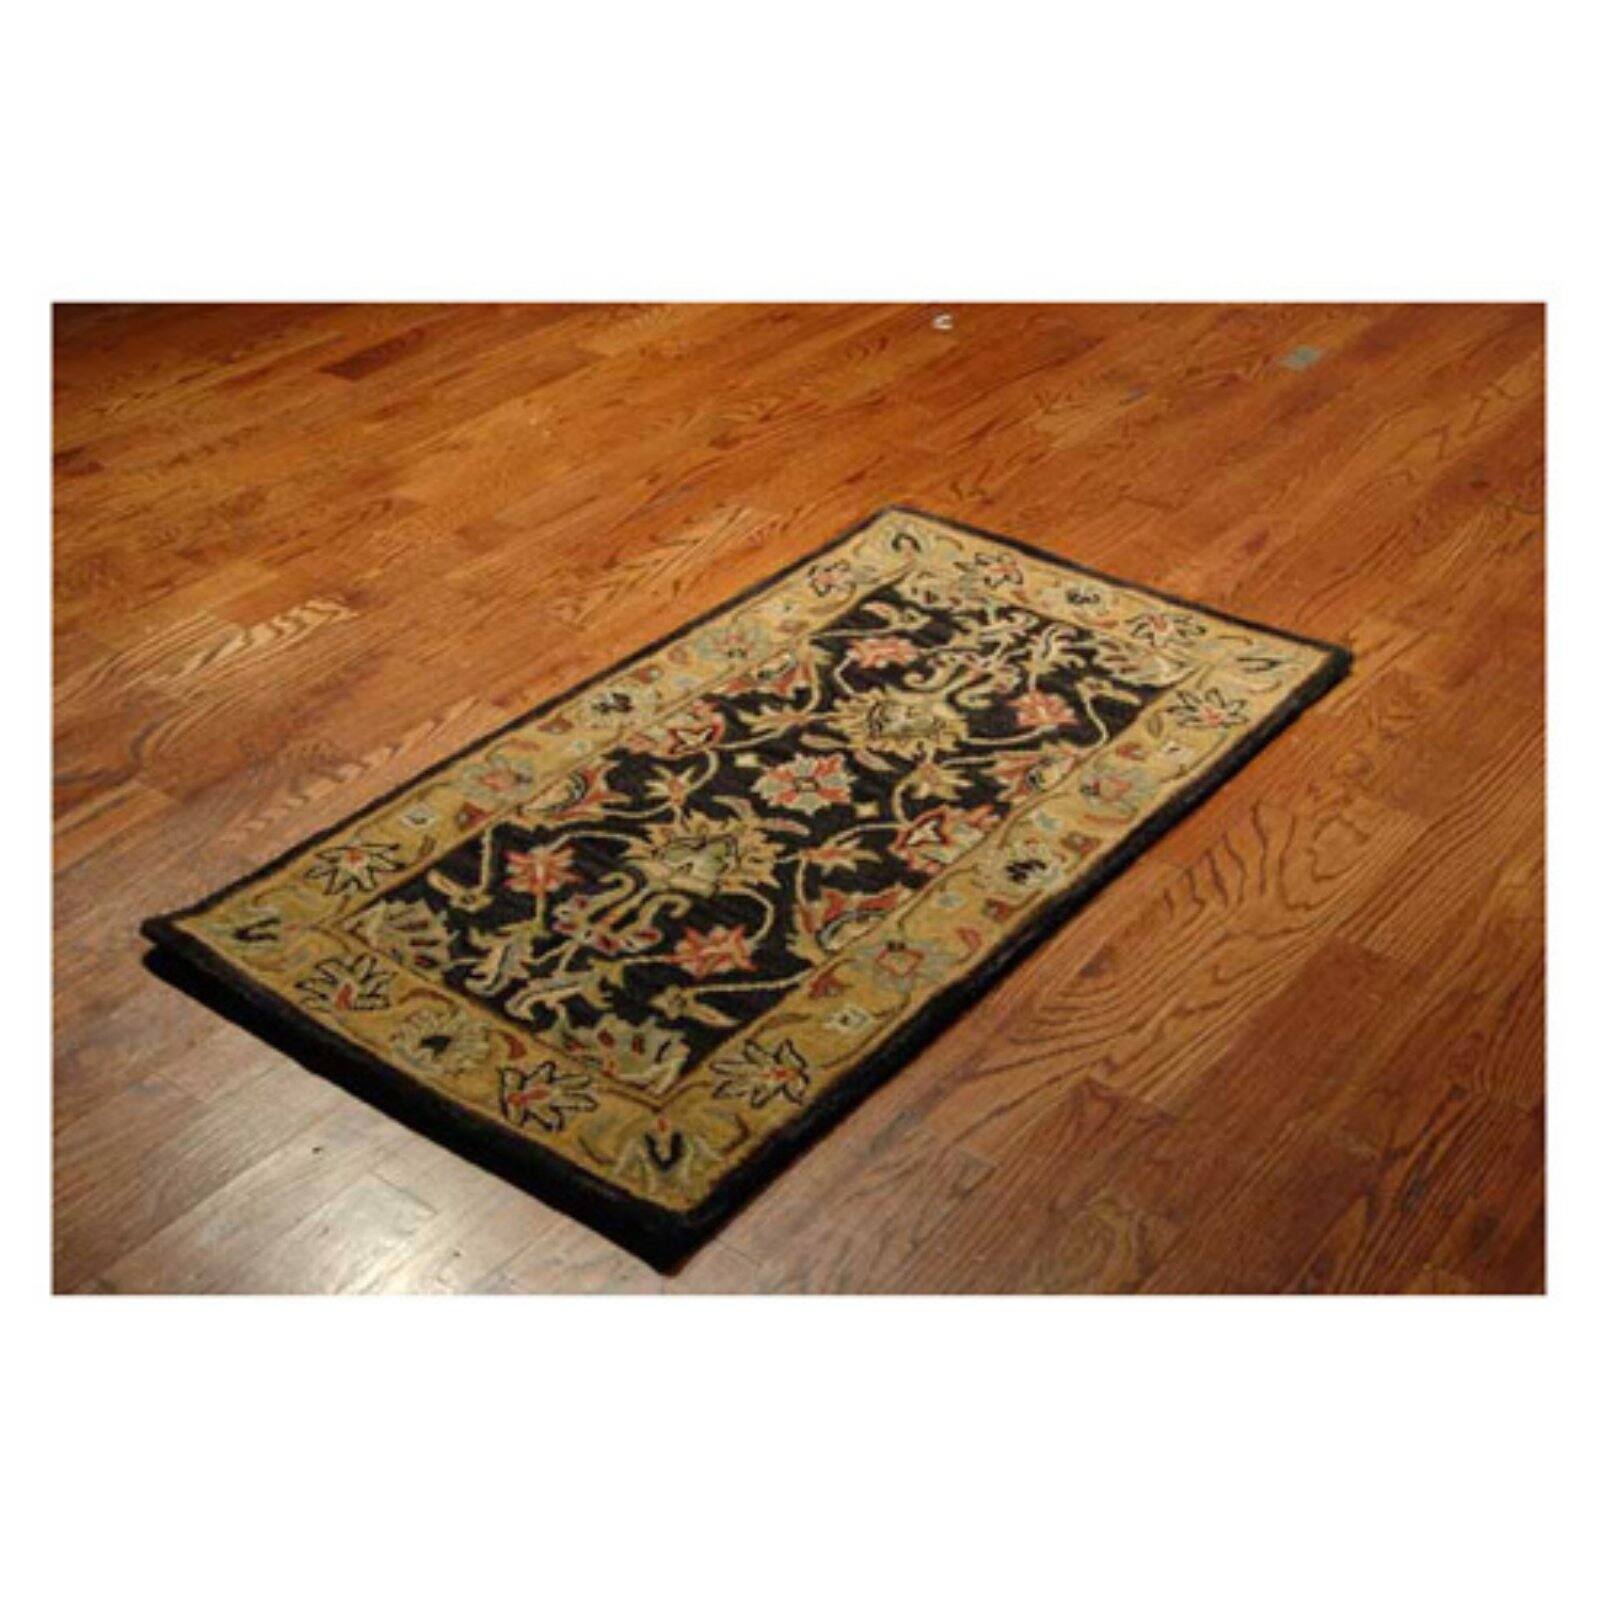 SAFAVIEH Heritage Regis Traditional Wool Area Rug, Charcoal/Gold, 7'6" x 9'6" Oval - image 2 of 10